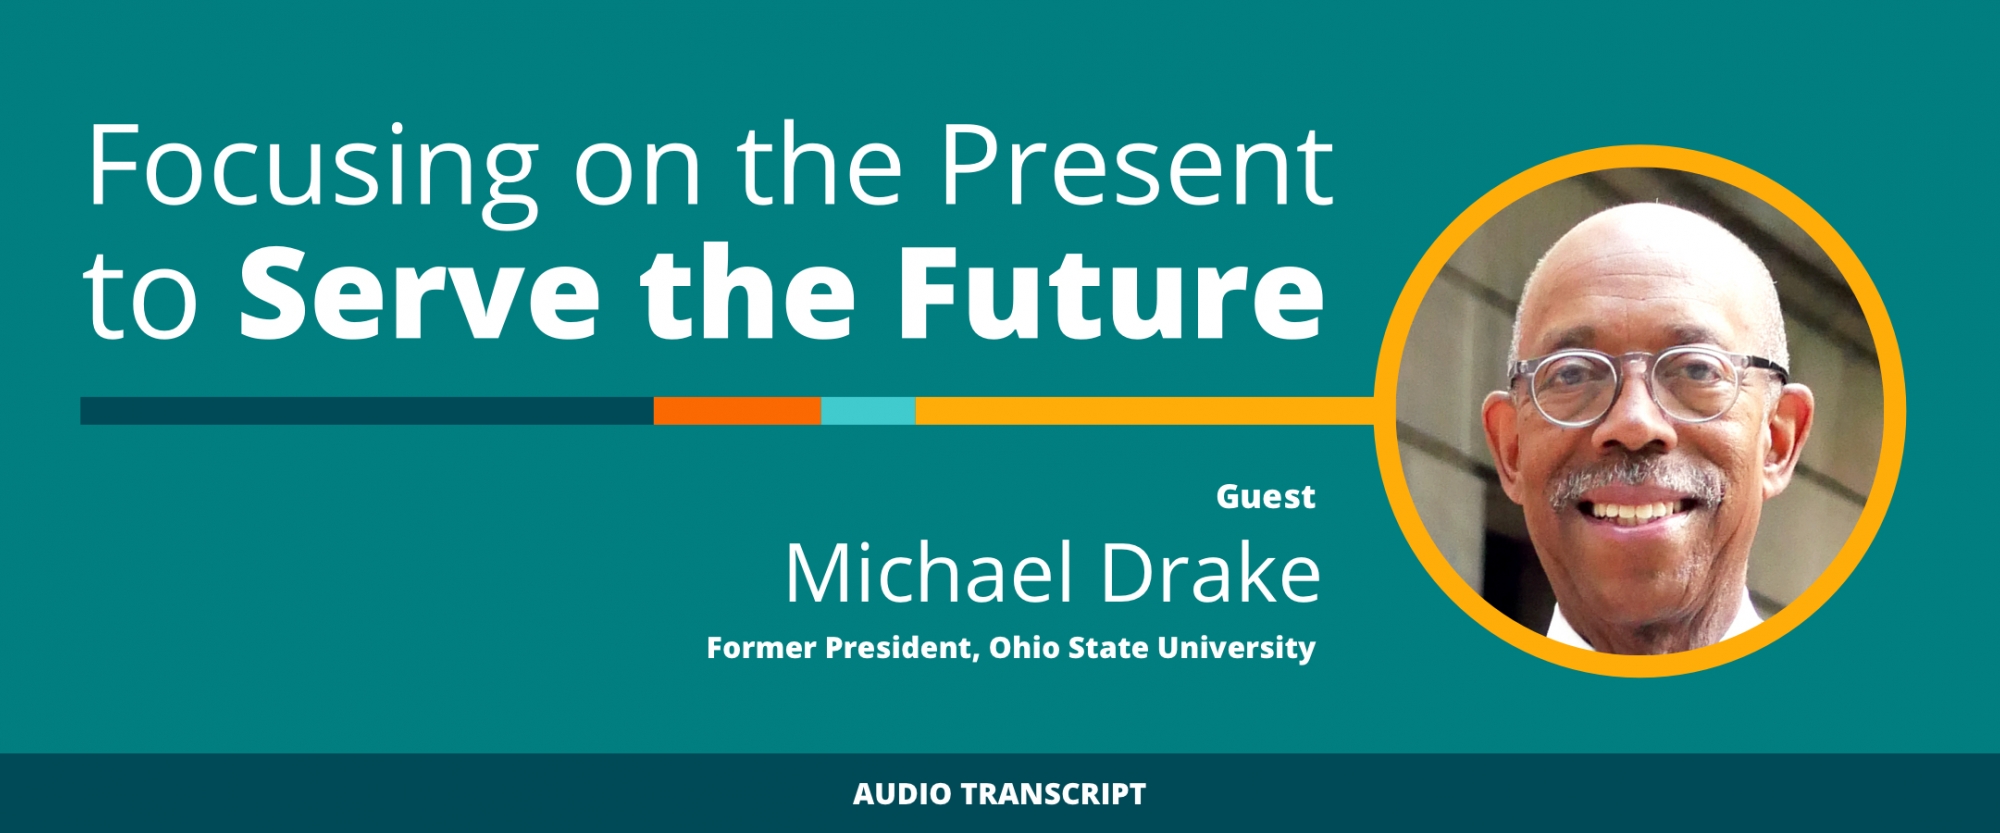 Weekly Wisdom Episode 4: Transcript of Conversation With Michael Drake, Former President, Ohio State University